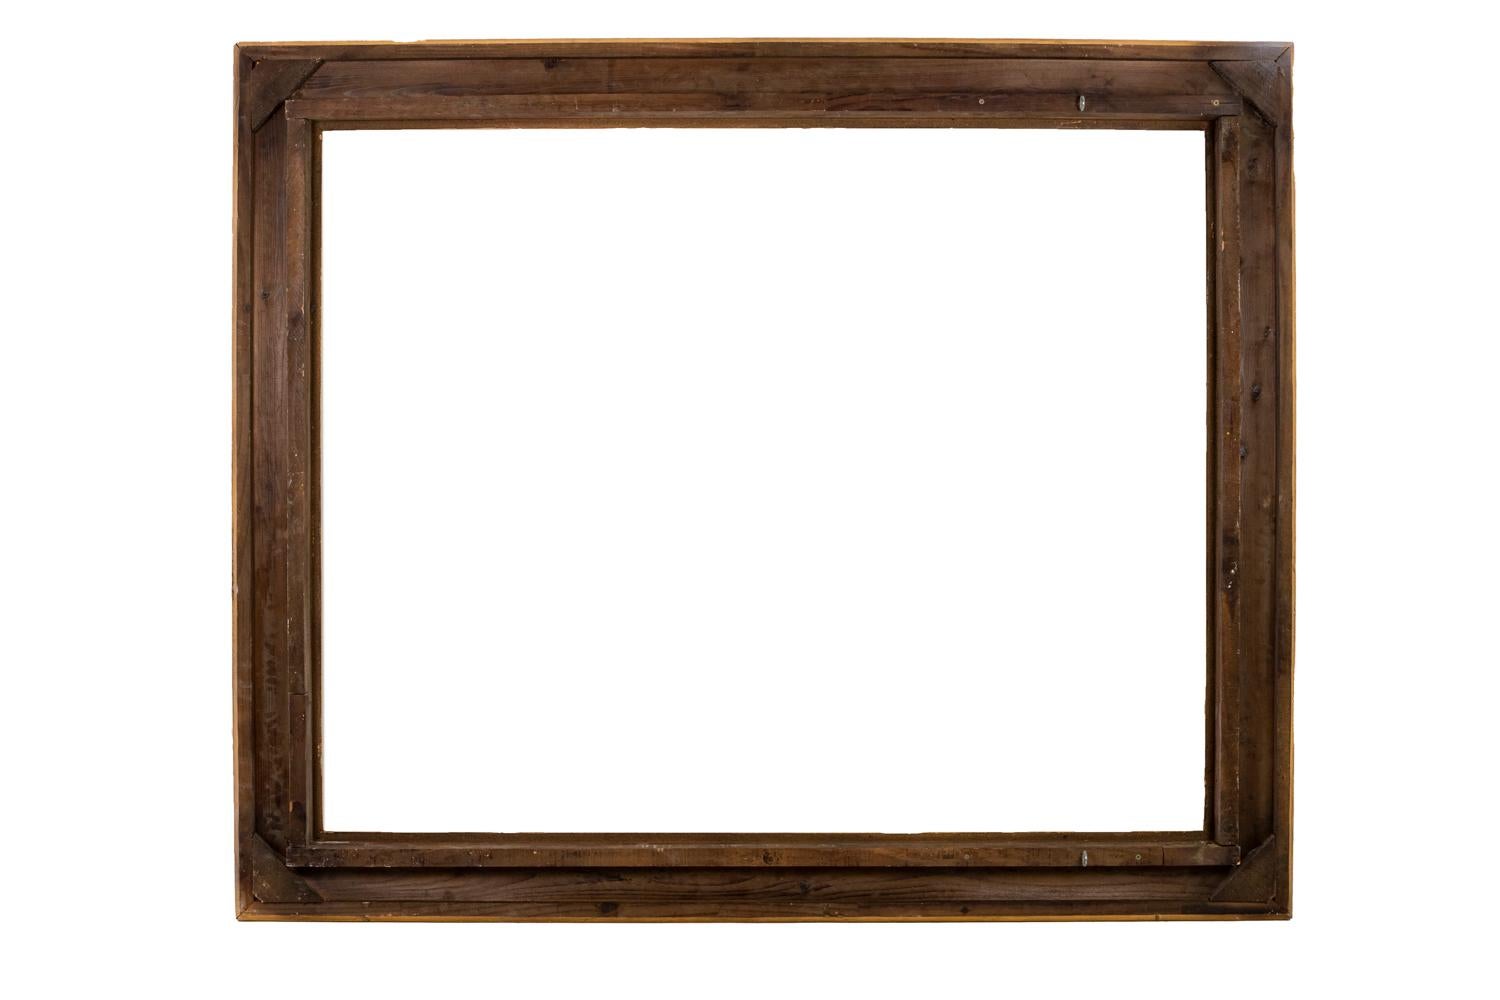 Frame in giltwood adorned with Arabian decor. It’s divided into two strips with vegetal scrolls separated by moldings. The superior strip is framed by two friezes of beads. Eight cartouches on each angle and on the middle of the mountings frame